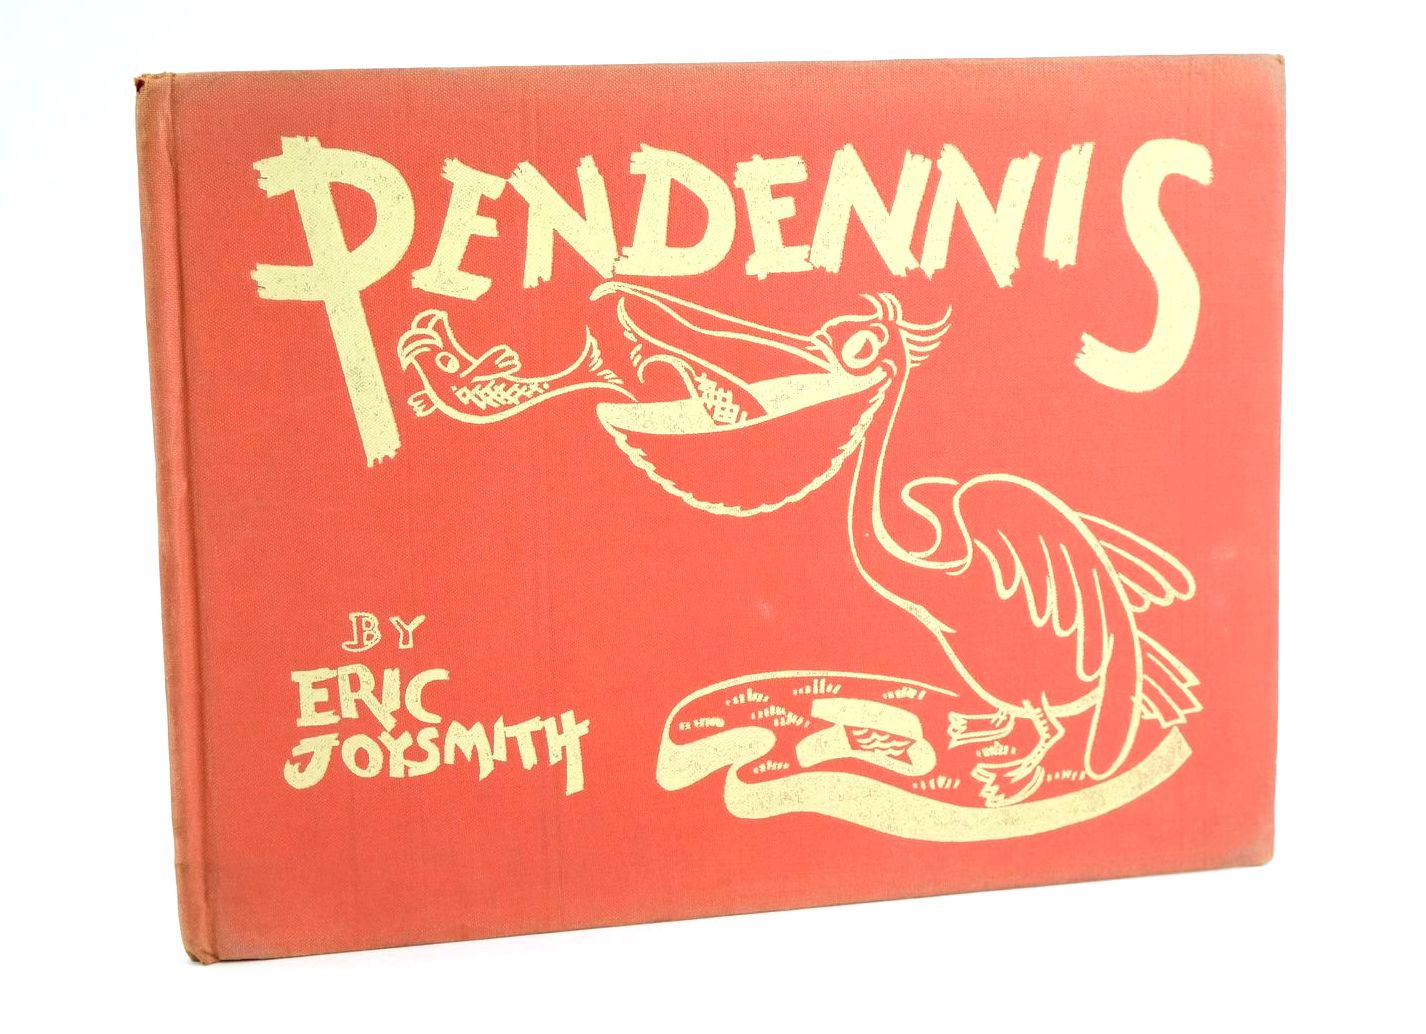 Photo of PENDENNIS THE PELICAN written by Joysmith, Eric illustrated by Joysmith, Eric published by Chatto &amp; Windus (STOCK CODE: 1323477)  for sale by Stella & Rose's Books